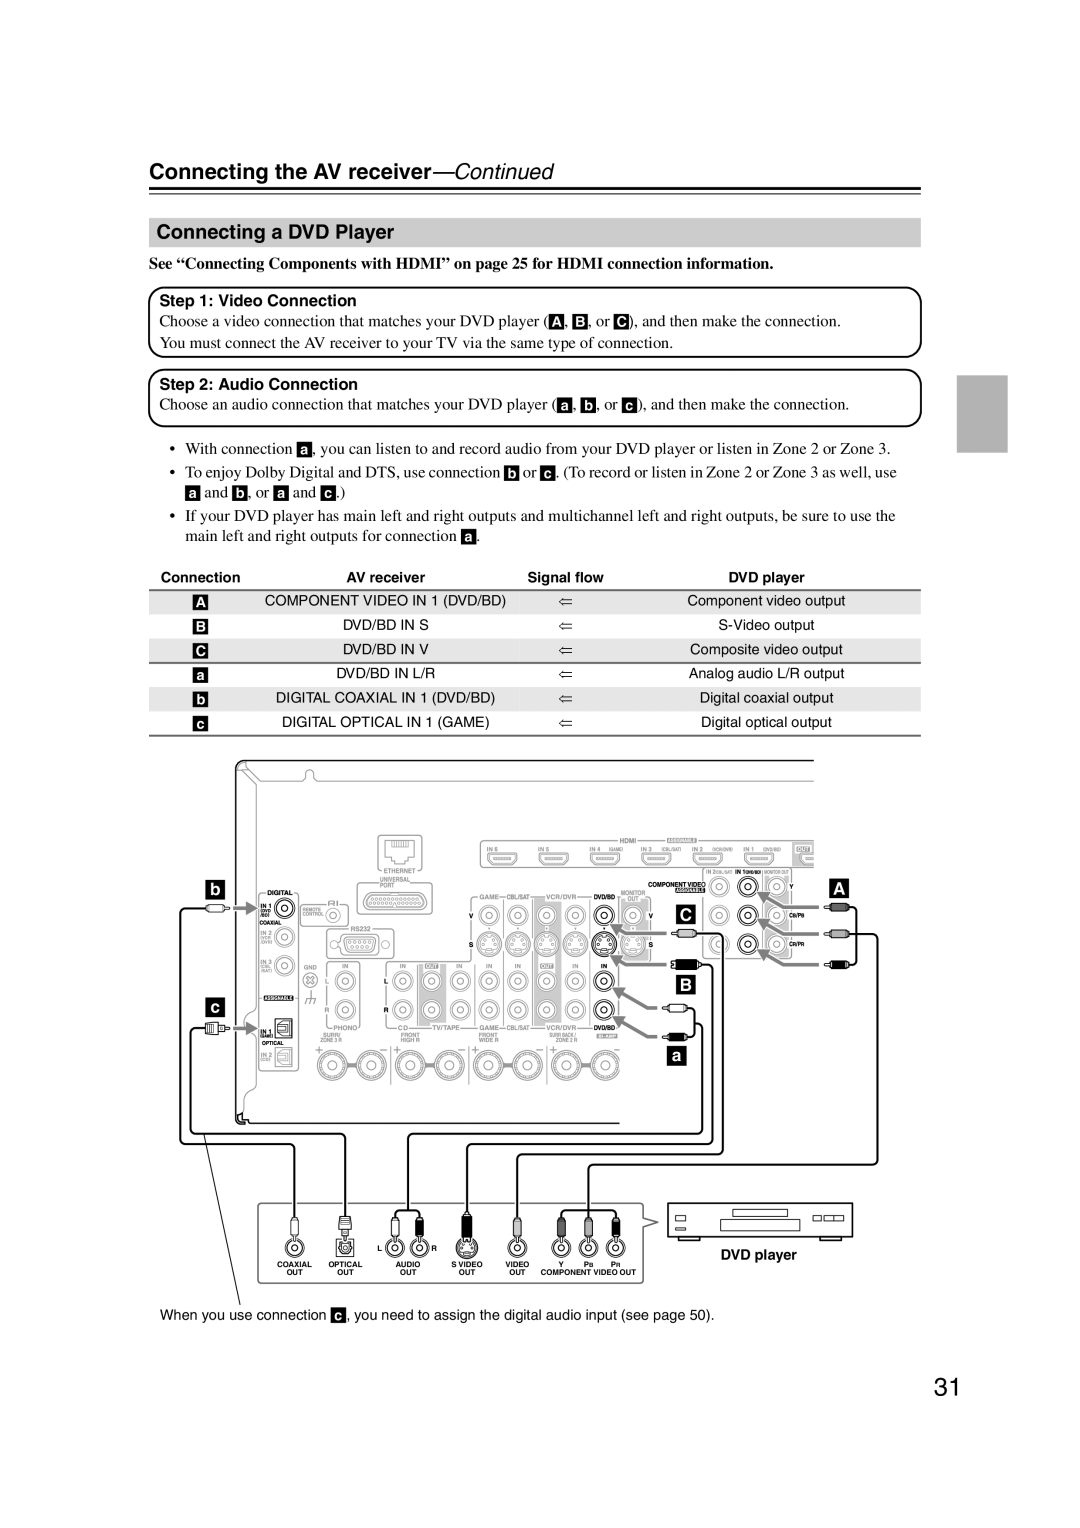 Onkyo HT-RC180, 29400021, TX-NR807 instruction manual Connecting a DVD Player, A C B, Connecting the AV receiver—Continued 